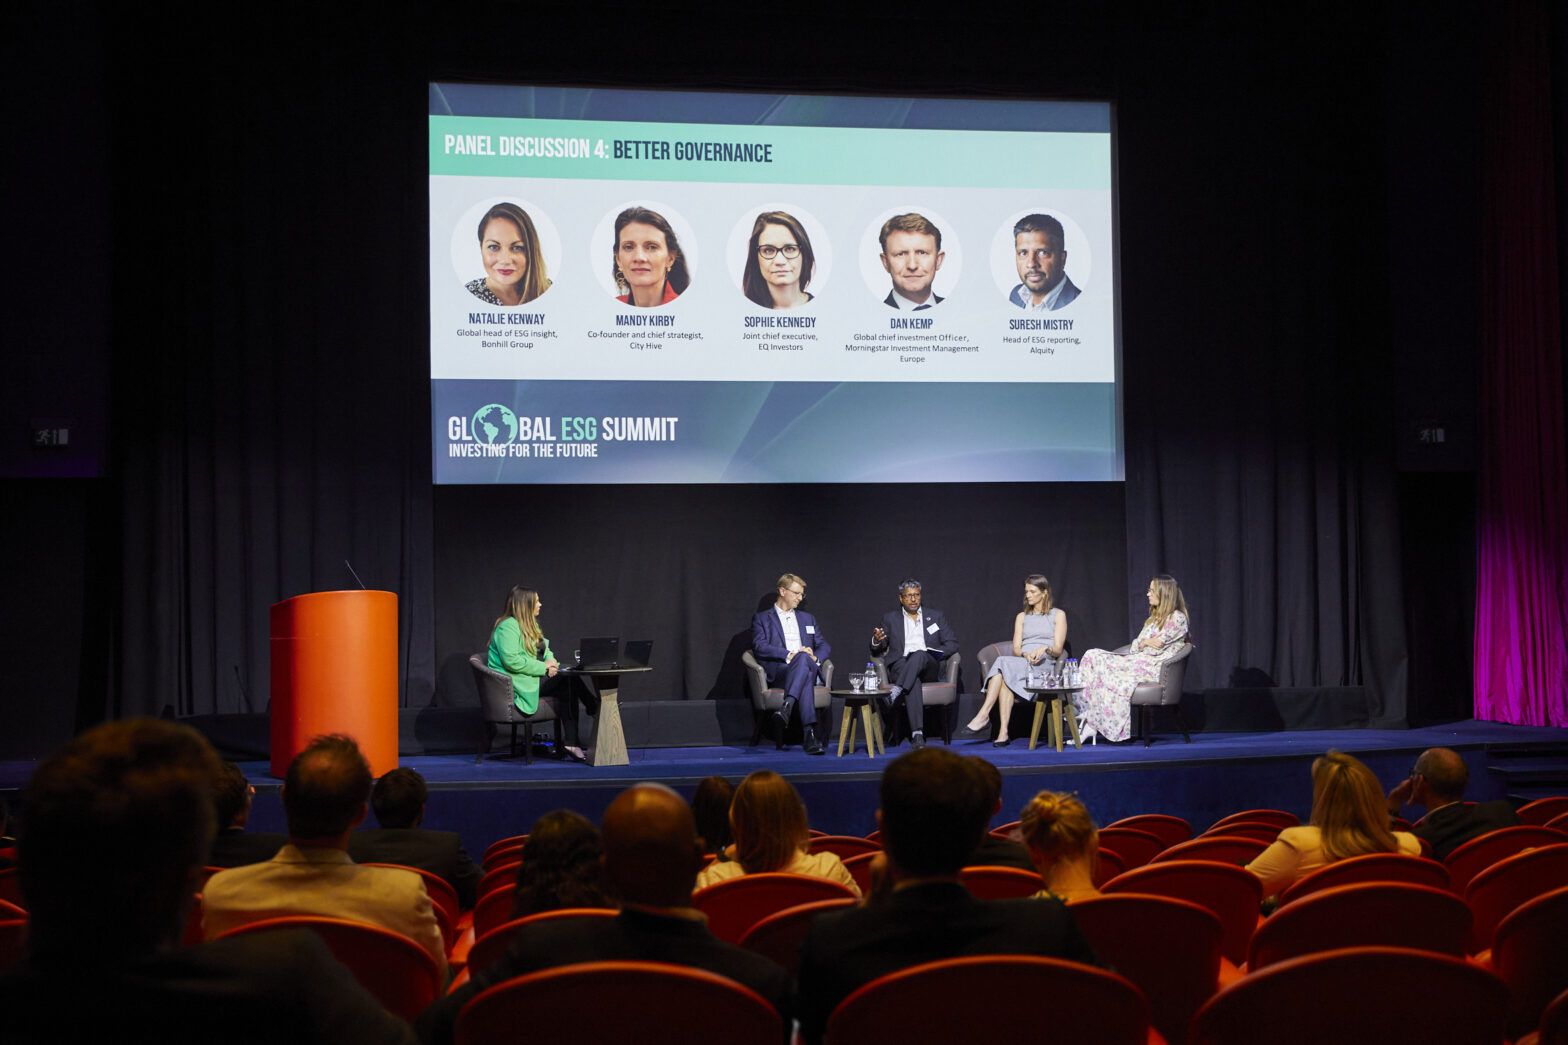 Global ESG Summit: The route to better governance